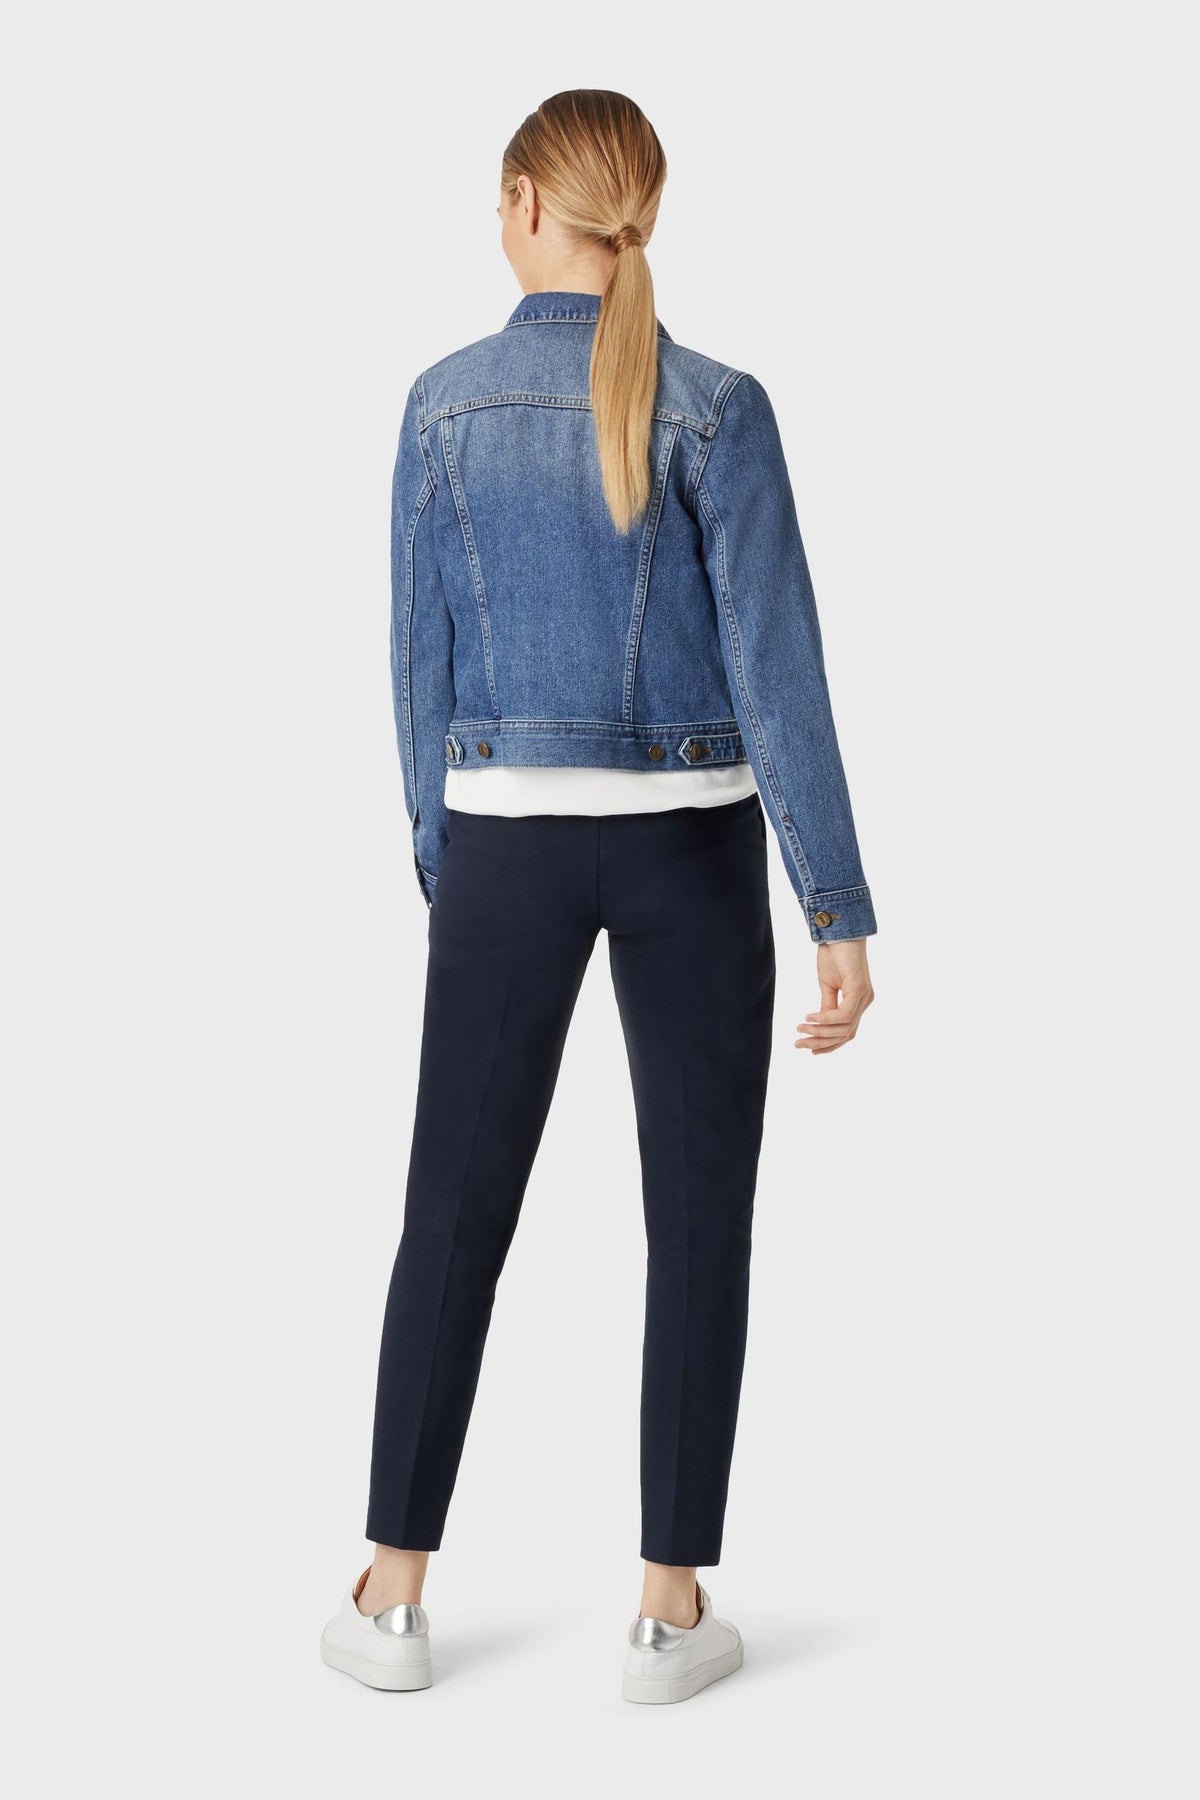 Stylish blue denim jacket for women, featuring a casual crop design with button closures.